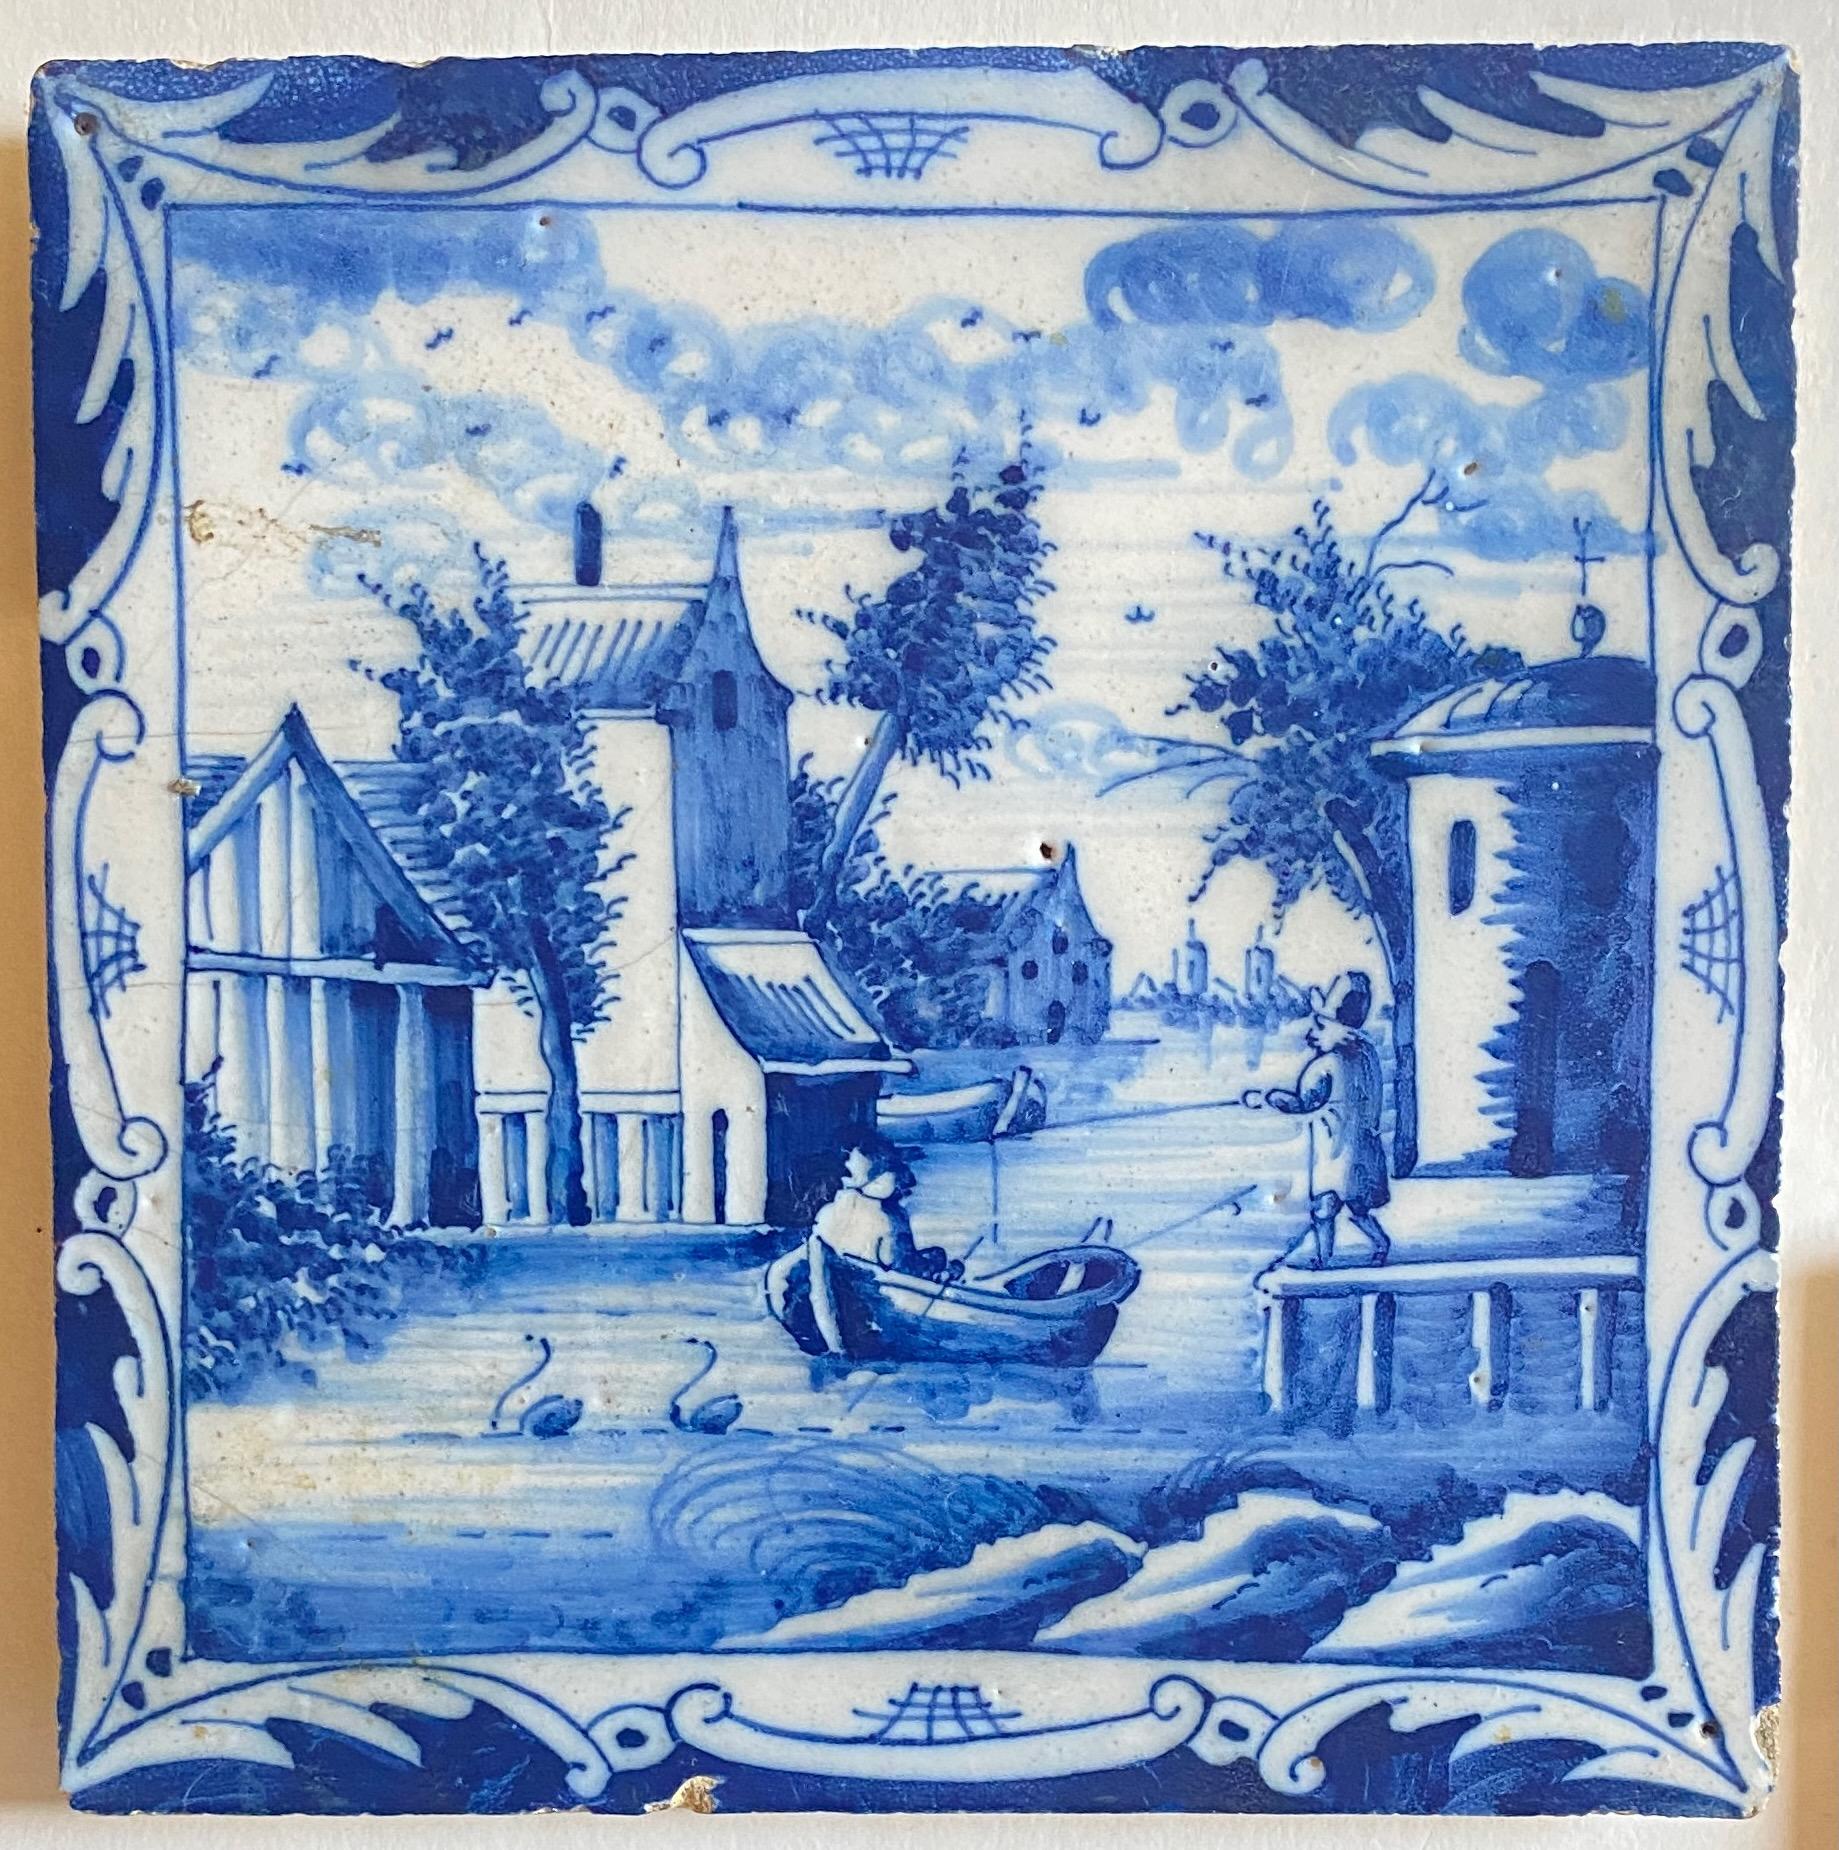 Hand-Painted Set of Three Exceptional 18th Century Hand Painted Delft Tiles